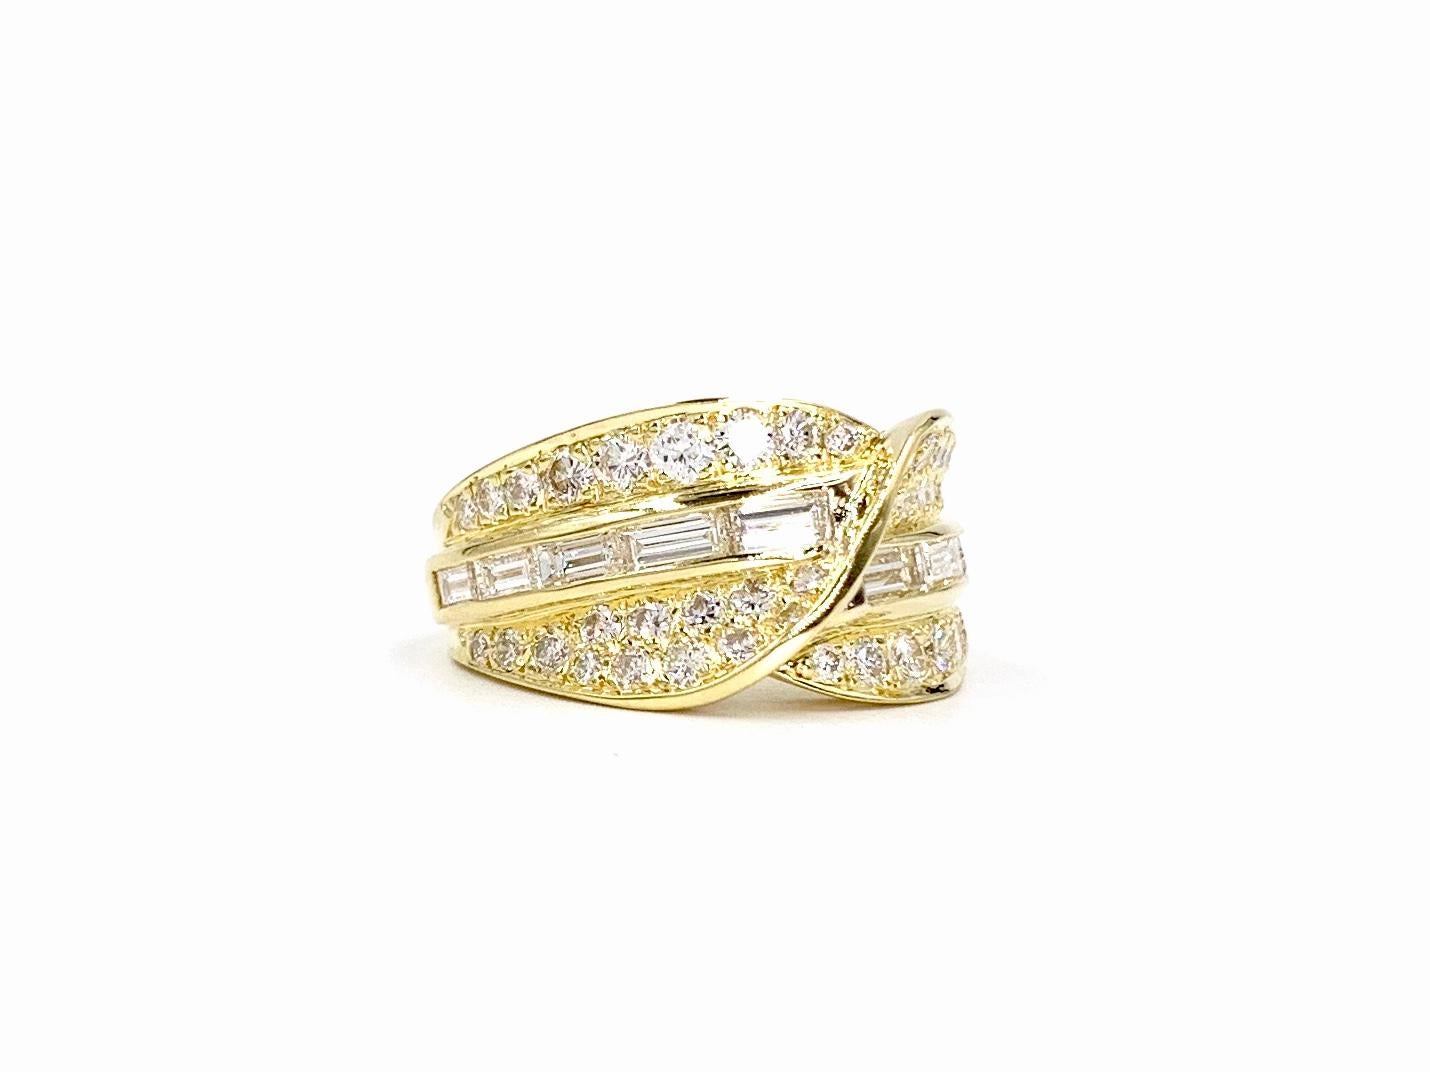 A wearable and very well made 18 karat yellow gold wide ring with a smooth and sleek design and a slight twist. This comfortable and low profile ring features 44 round brilliant diamonds at .85 carats and 10 baguette diamonds at .97 carats total